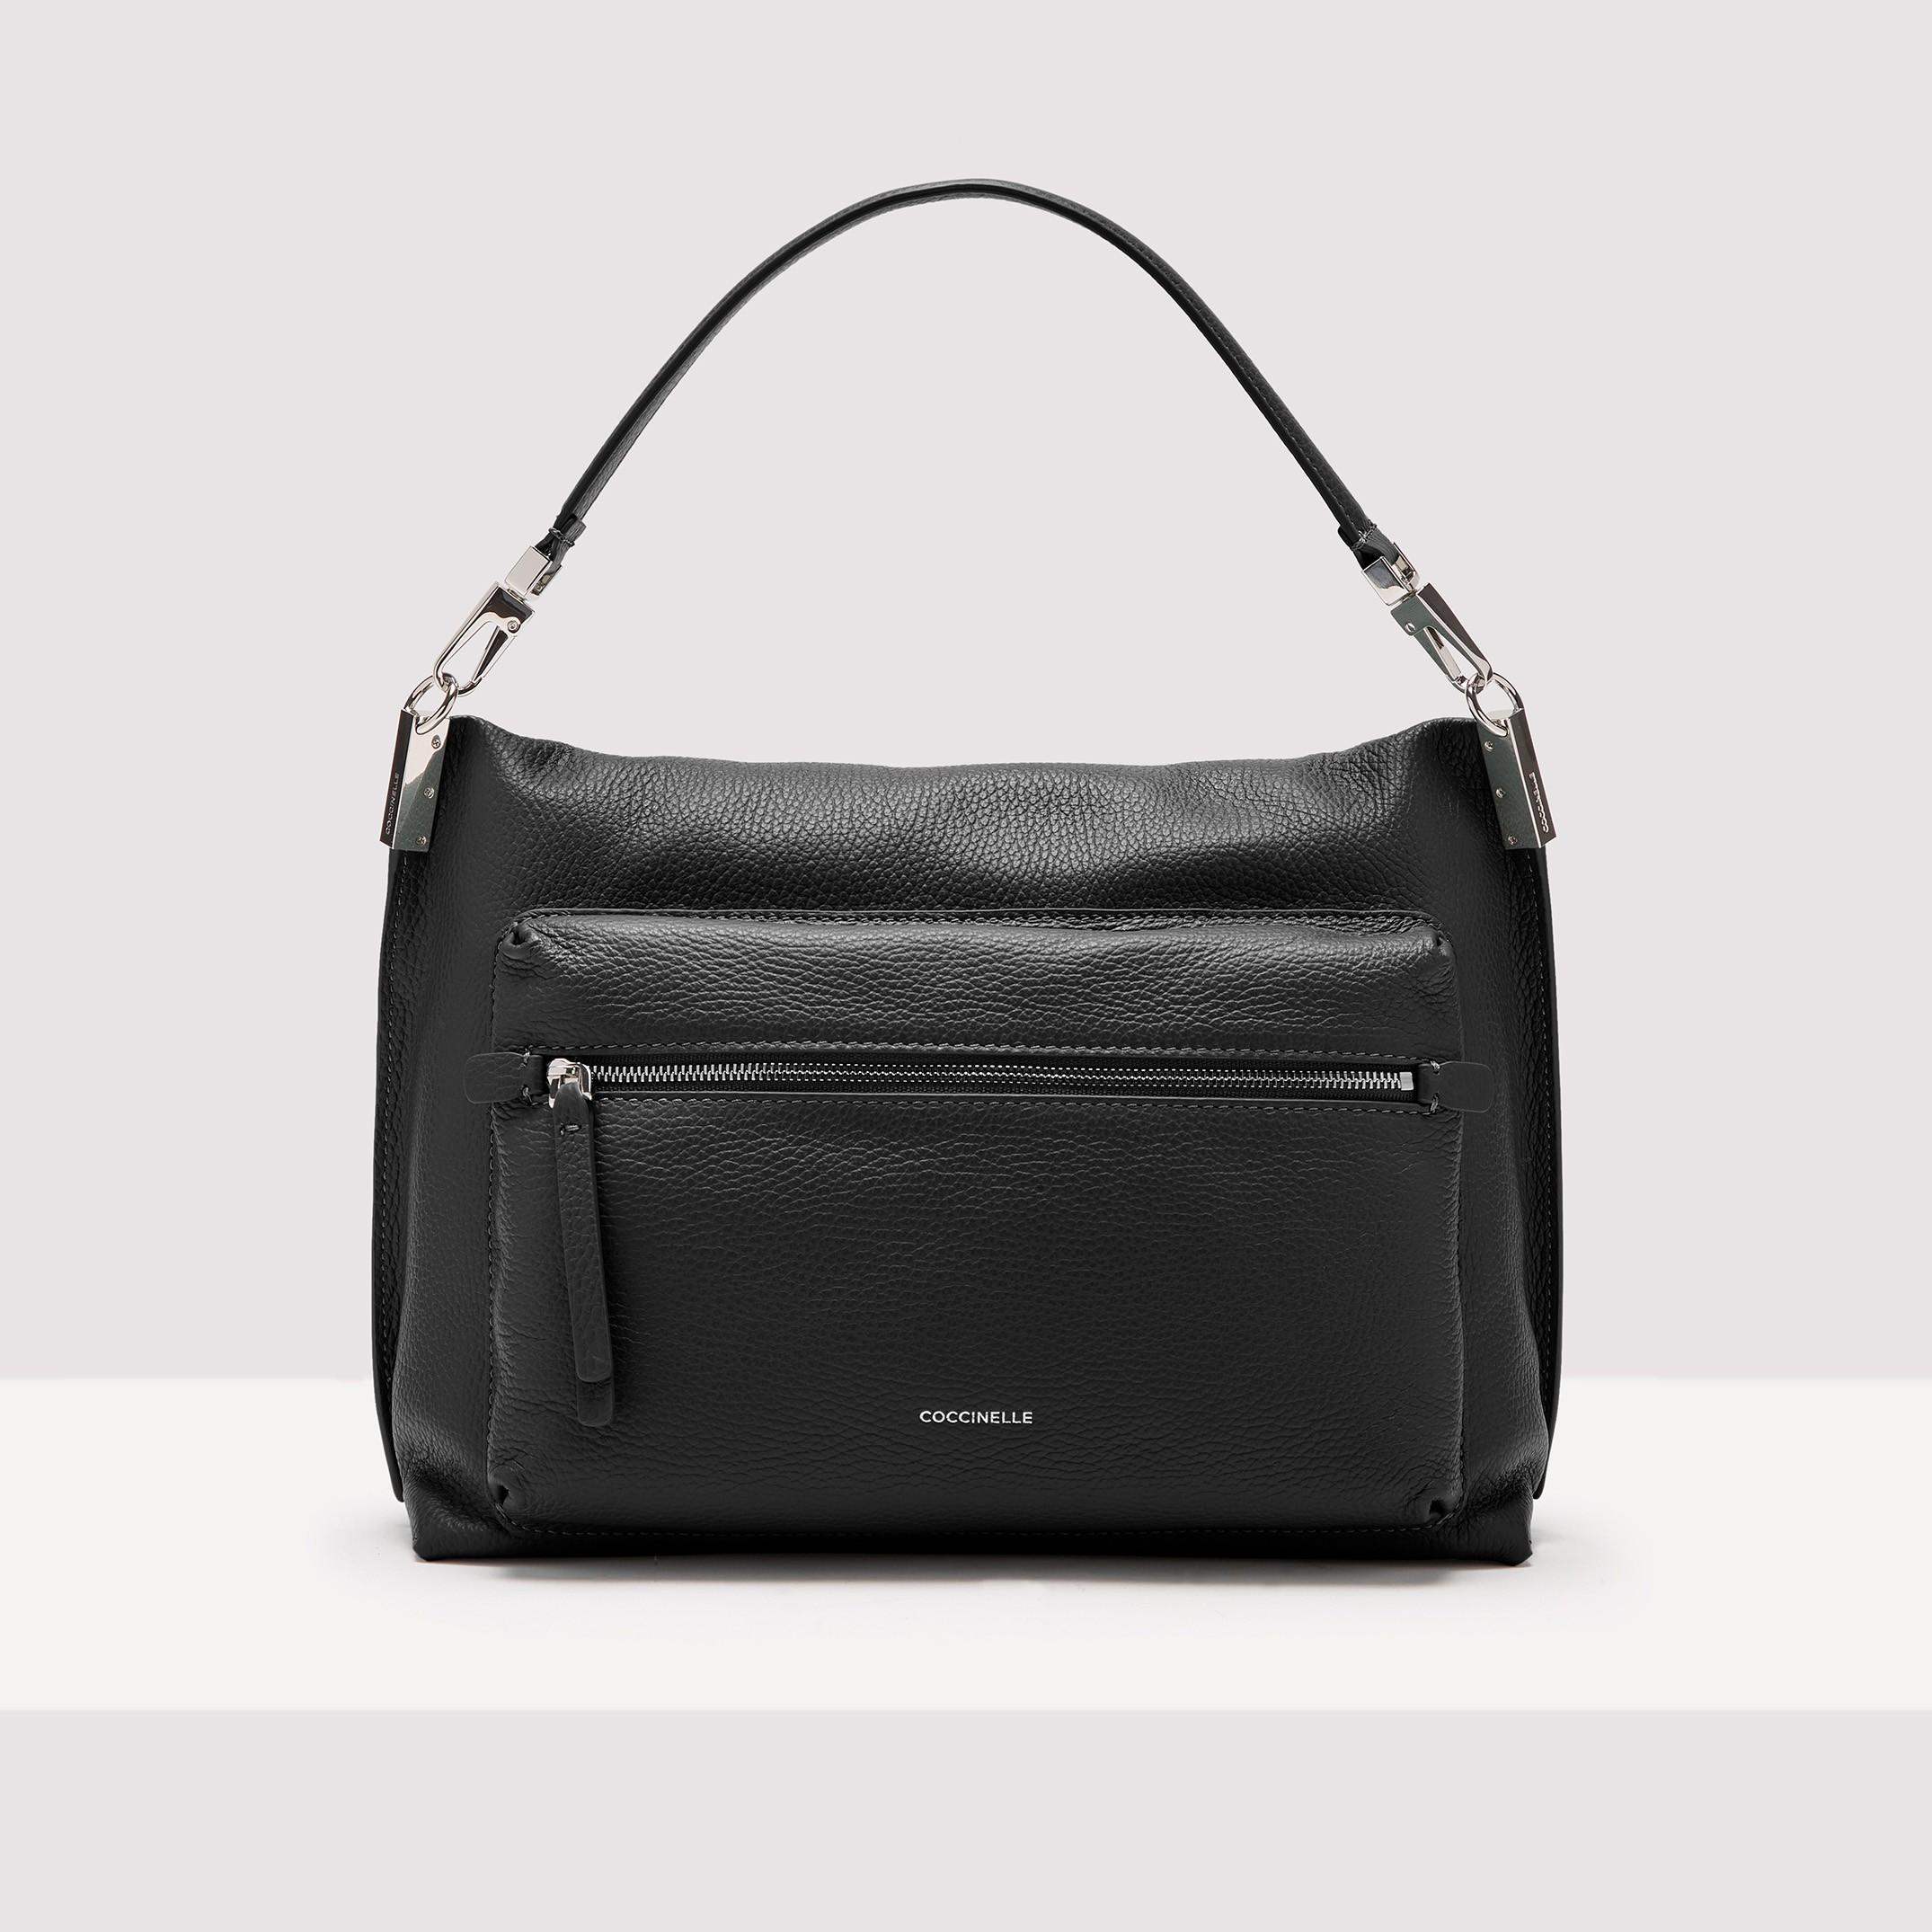 Coccinelle Grained Leather Handbag Hyle Large in Black | Lyst